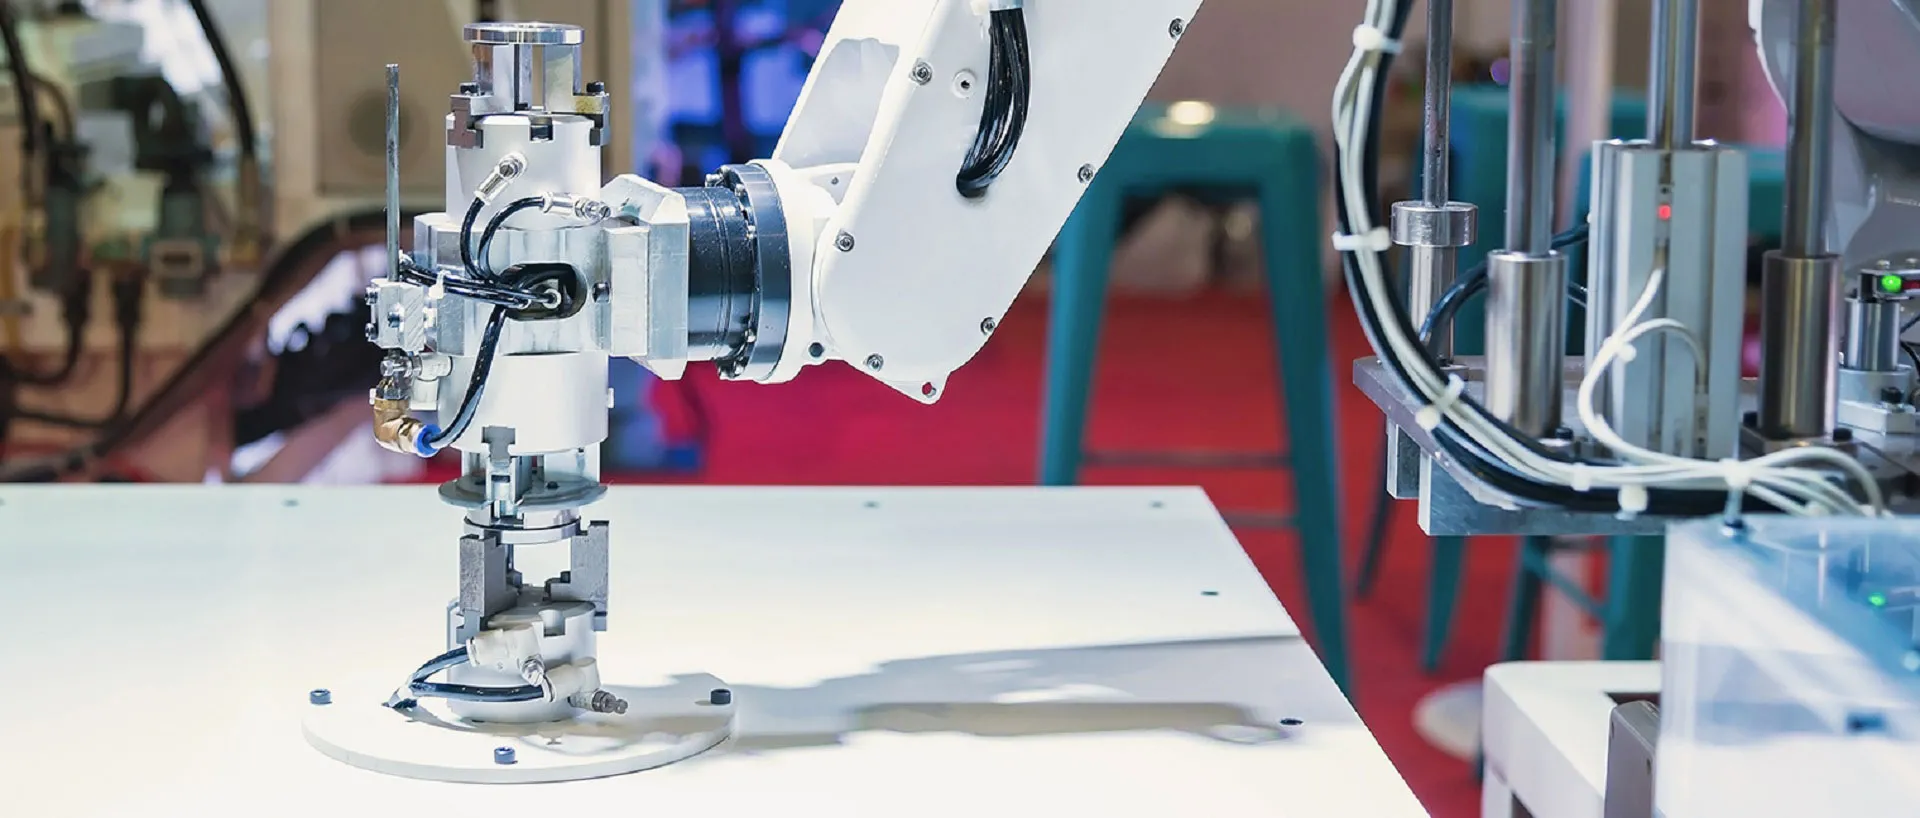 Industrial Robots Machine Tools and 3D Printers > Dassault Systèmes 